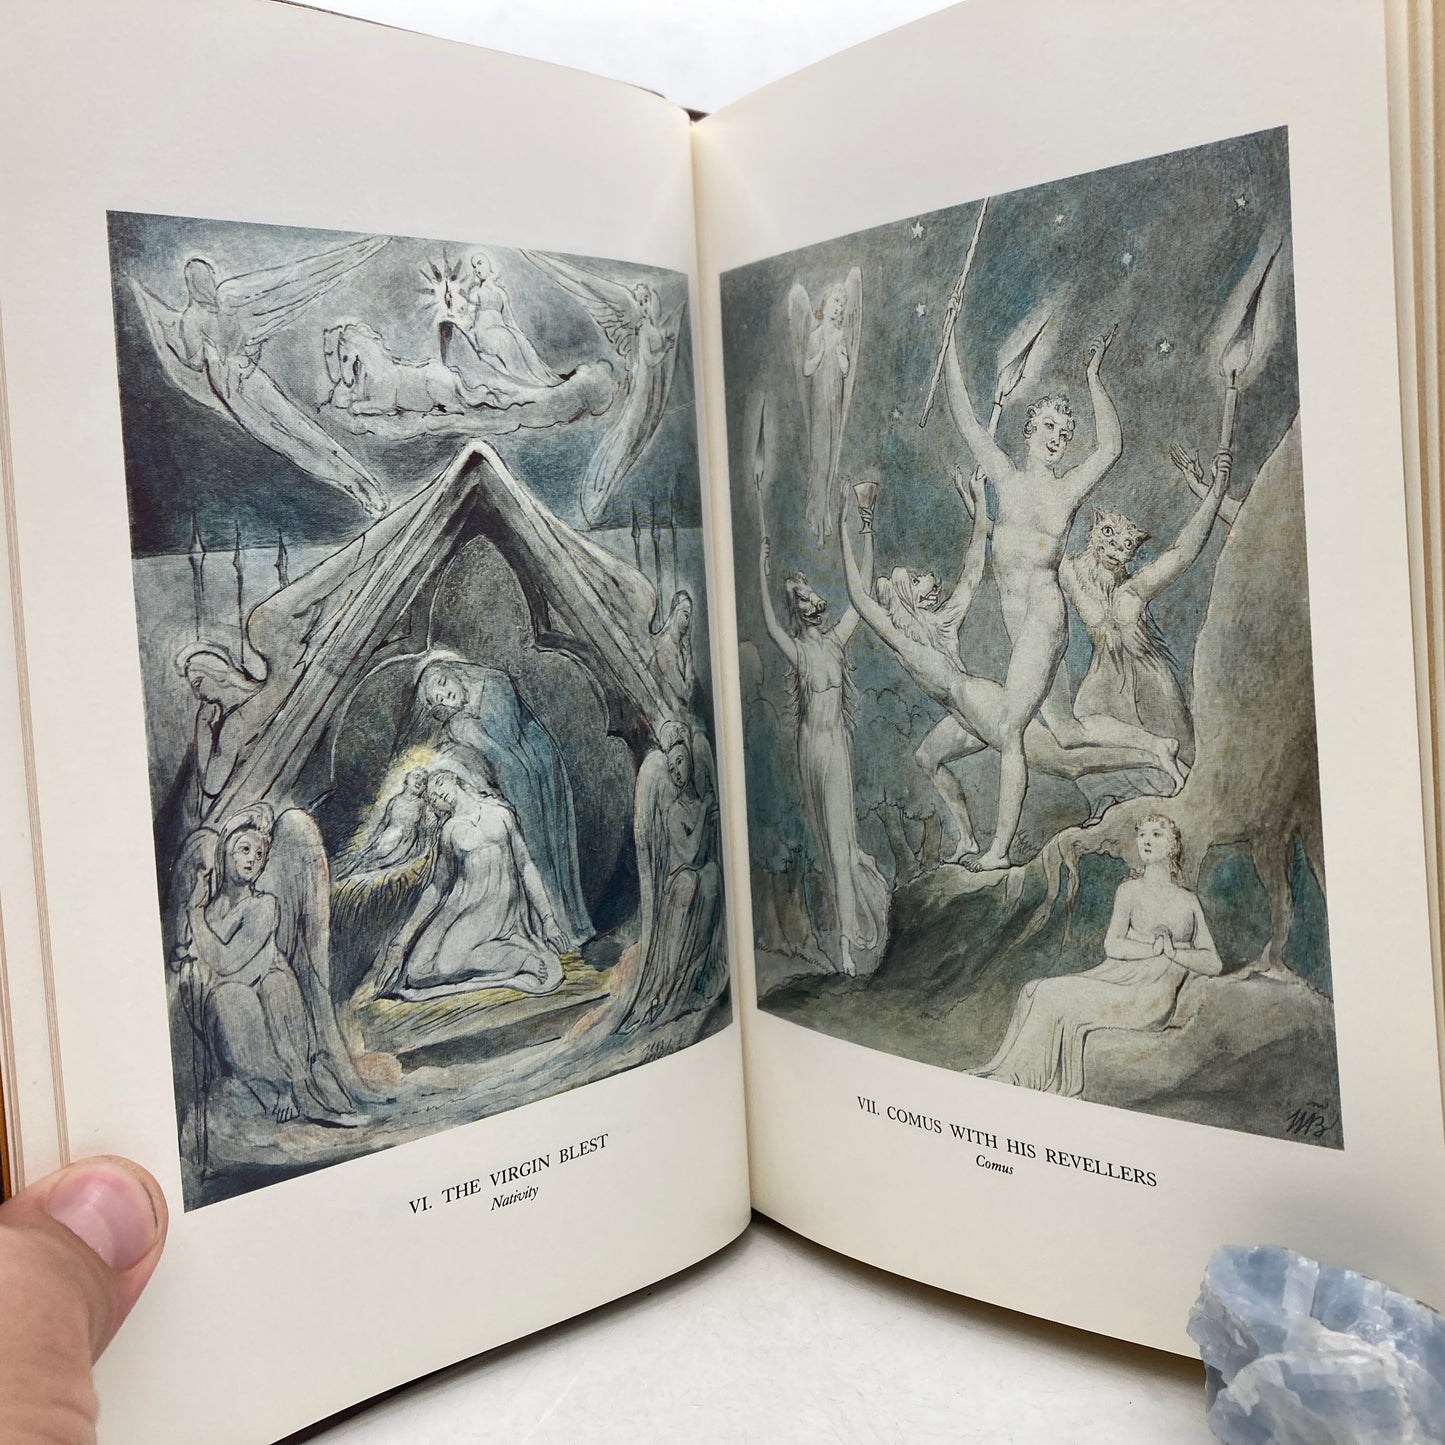 MILTON, John "Works, incl. Paradise Lost" [Franklin Library, 1978] William Blake